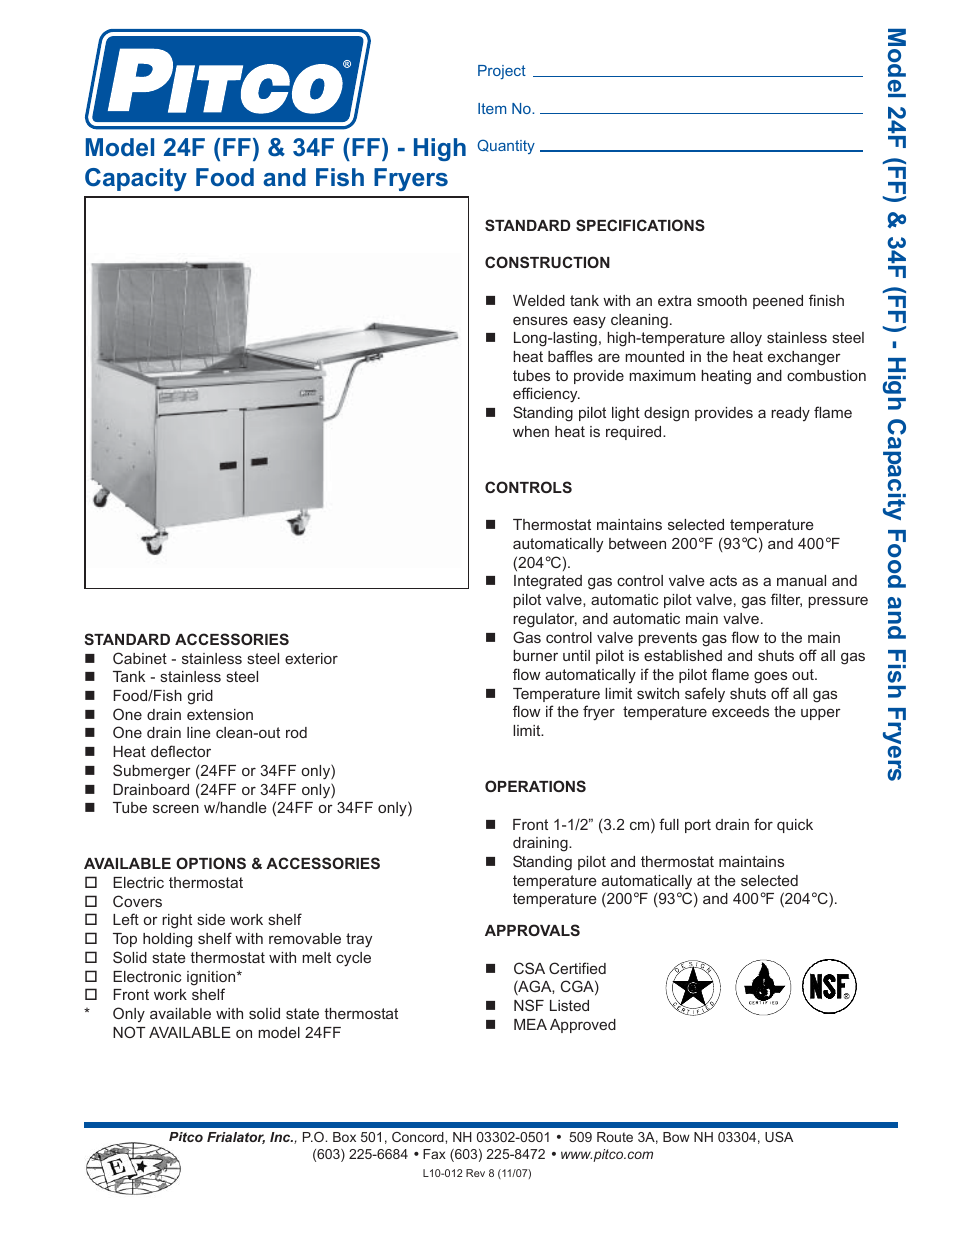 High Capacity Food and Fish Fryers 34F (FF)